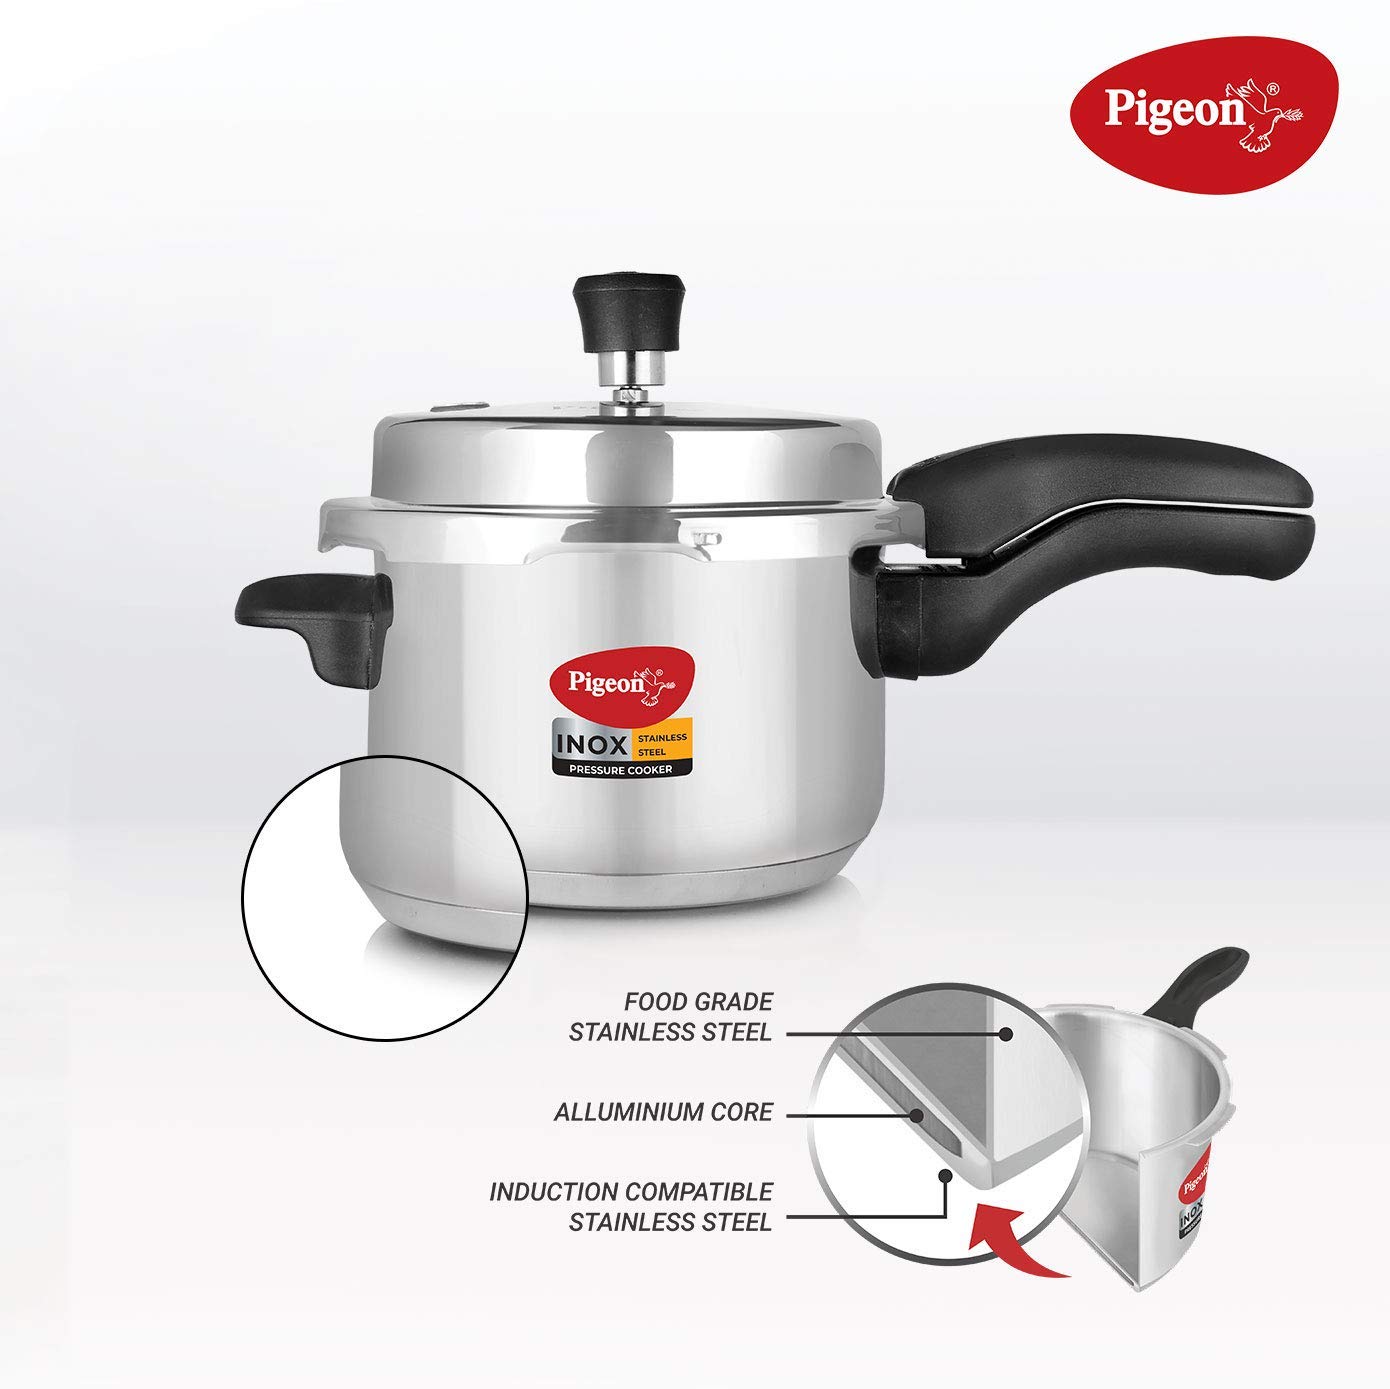 Pigeon Inox Stainless Steel Outer Lid Pressure Cooker 3 Litres, Induction Base - 14044